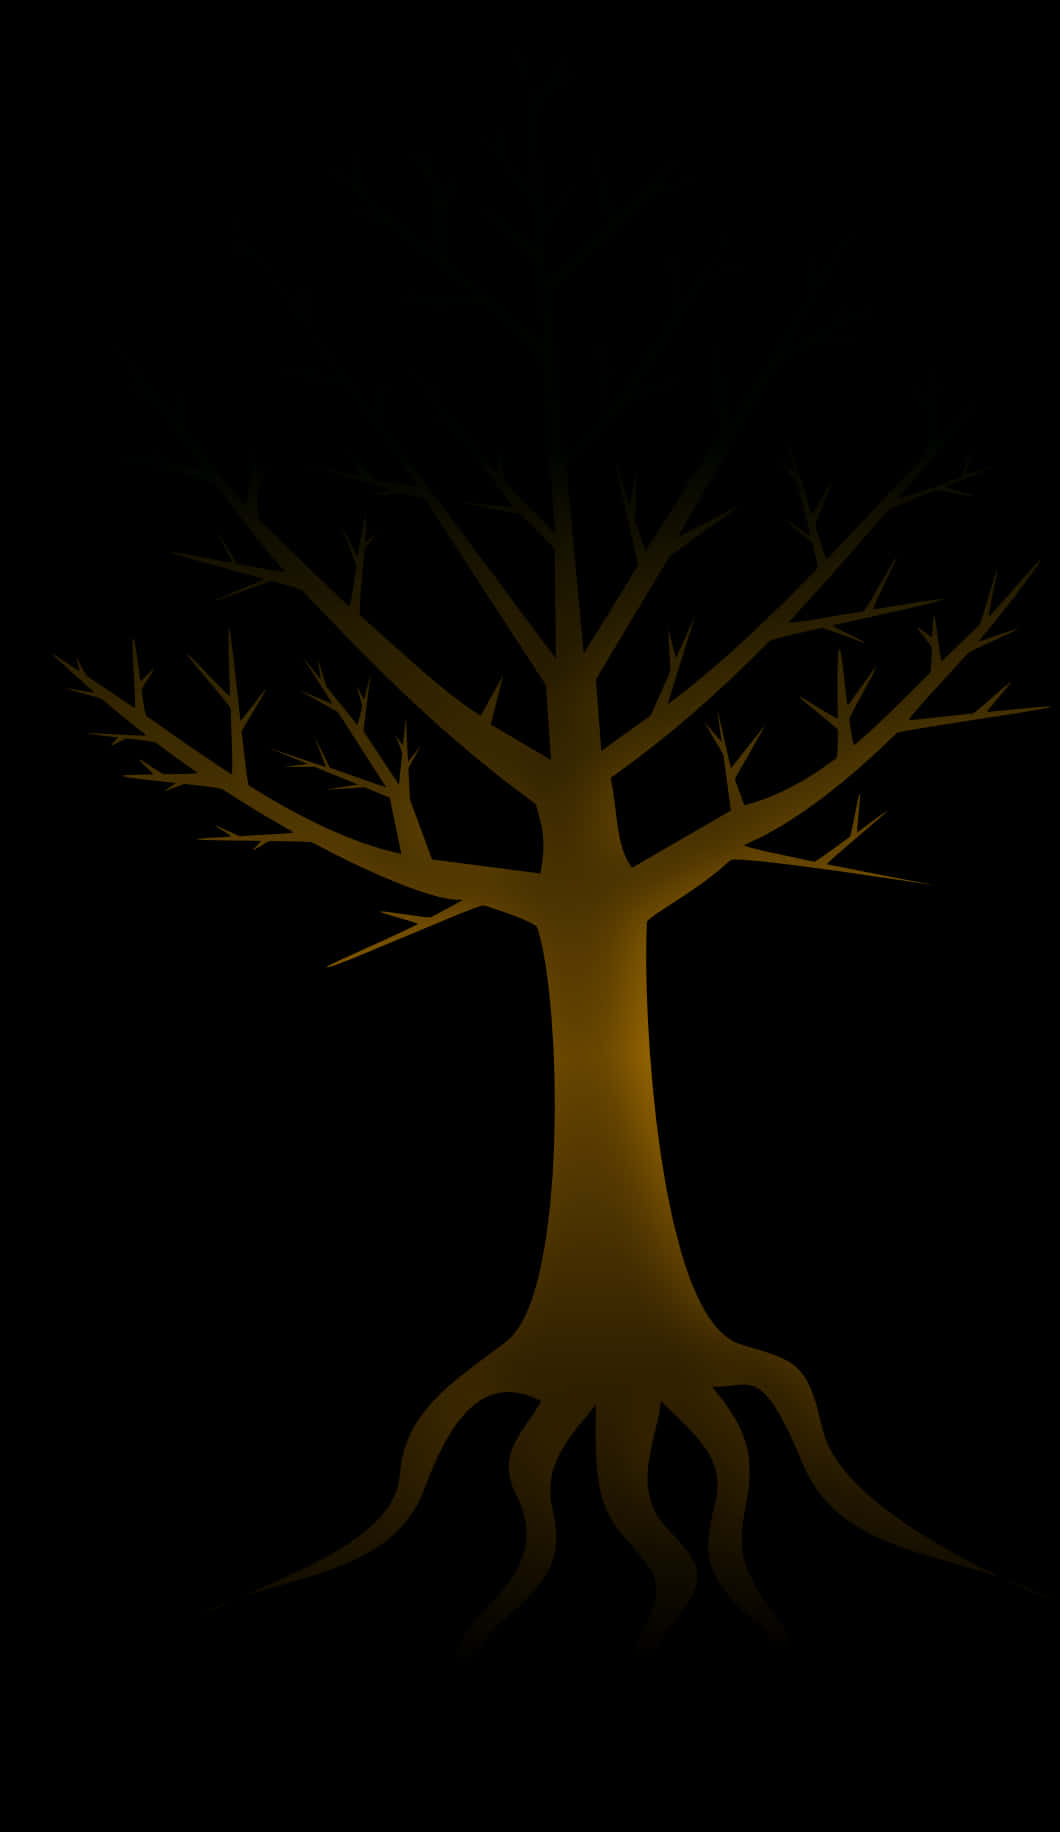 Golden Tree Silhouetteon Black Background PNG image